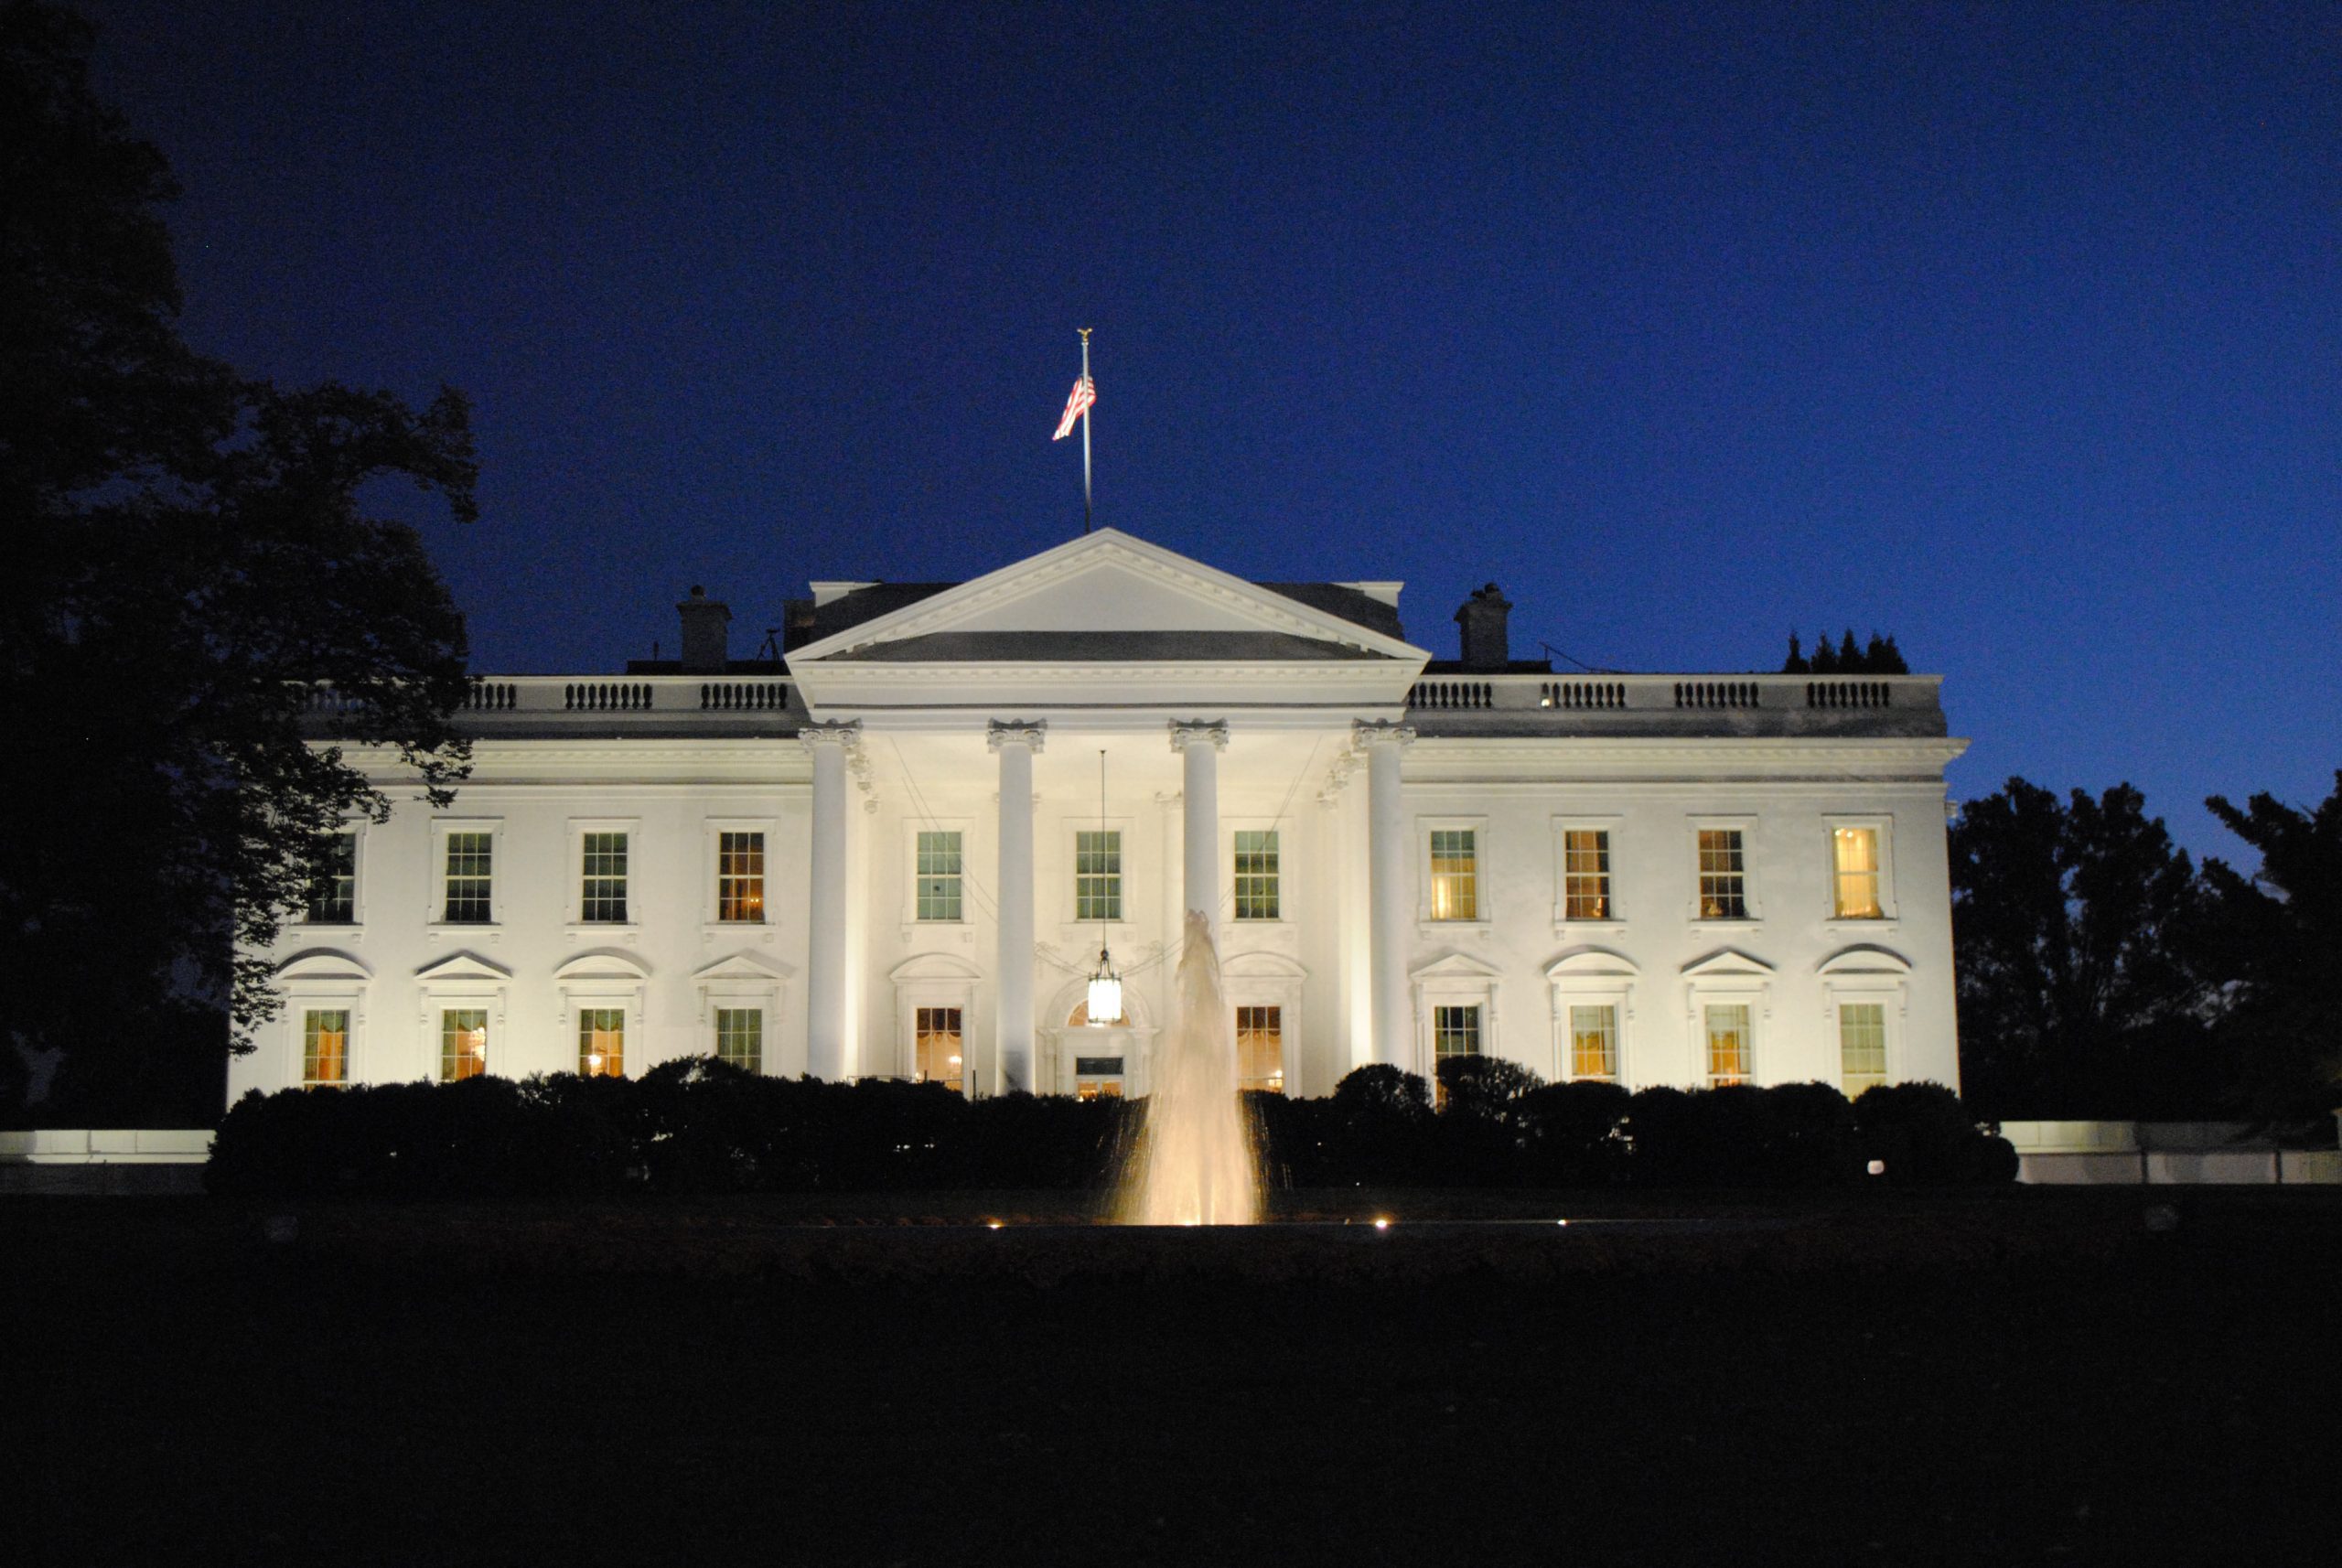 Photograph of the White House